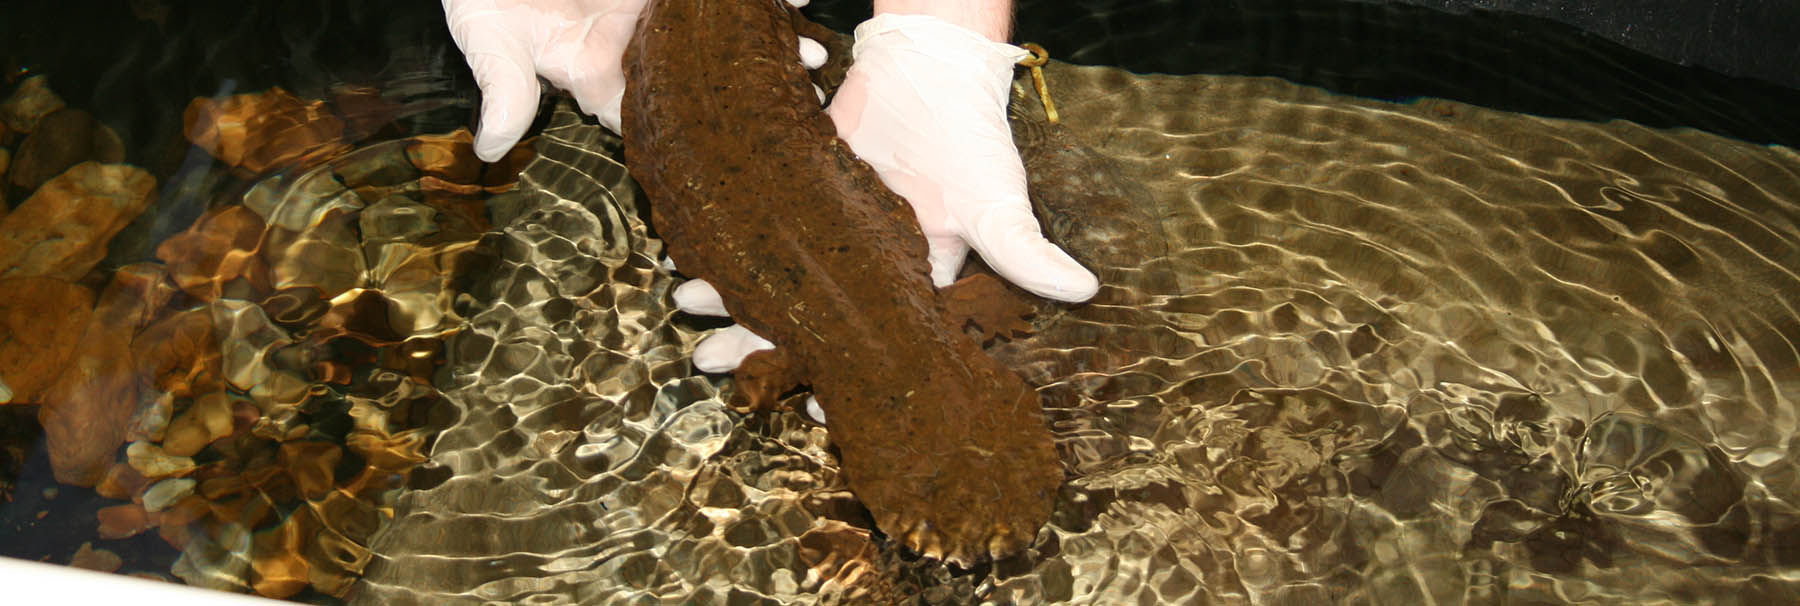 Hellbender being held in captivity for health check.